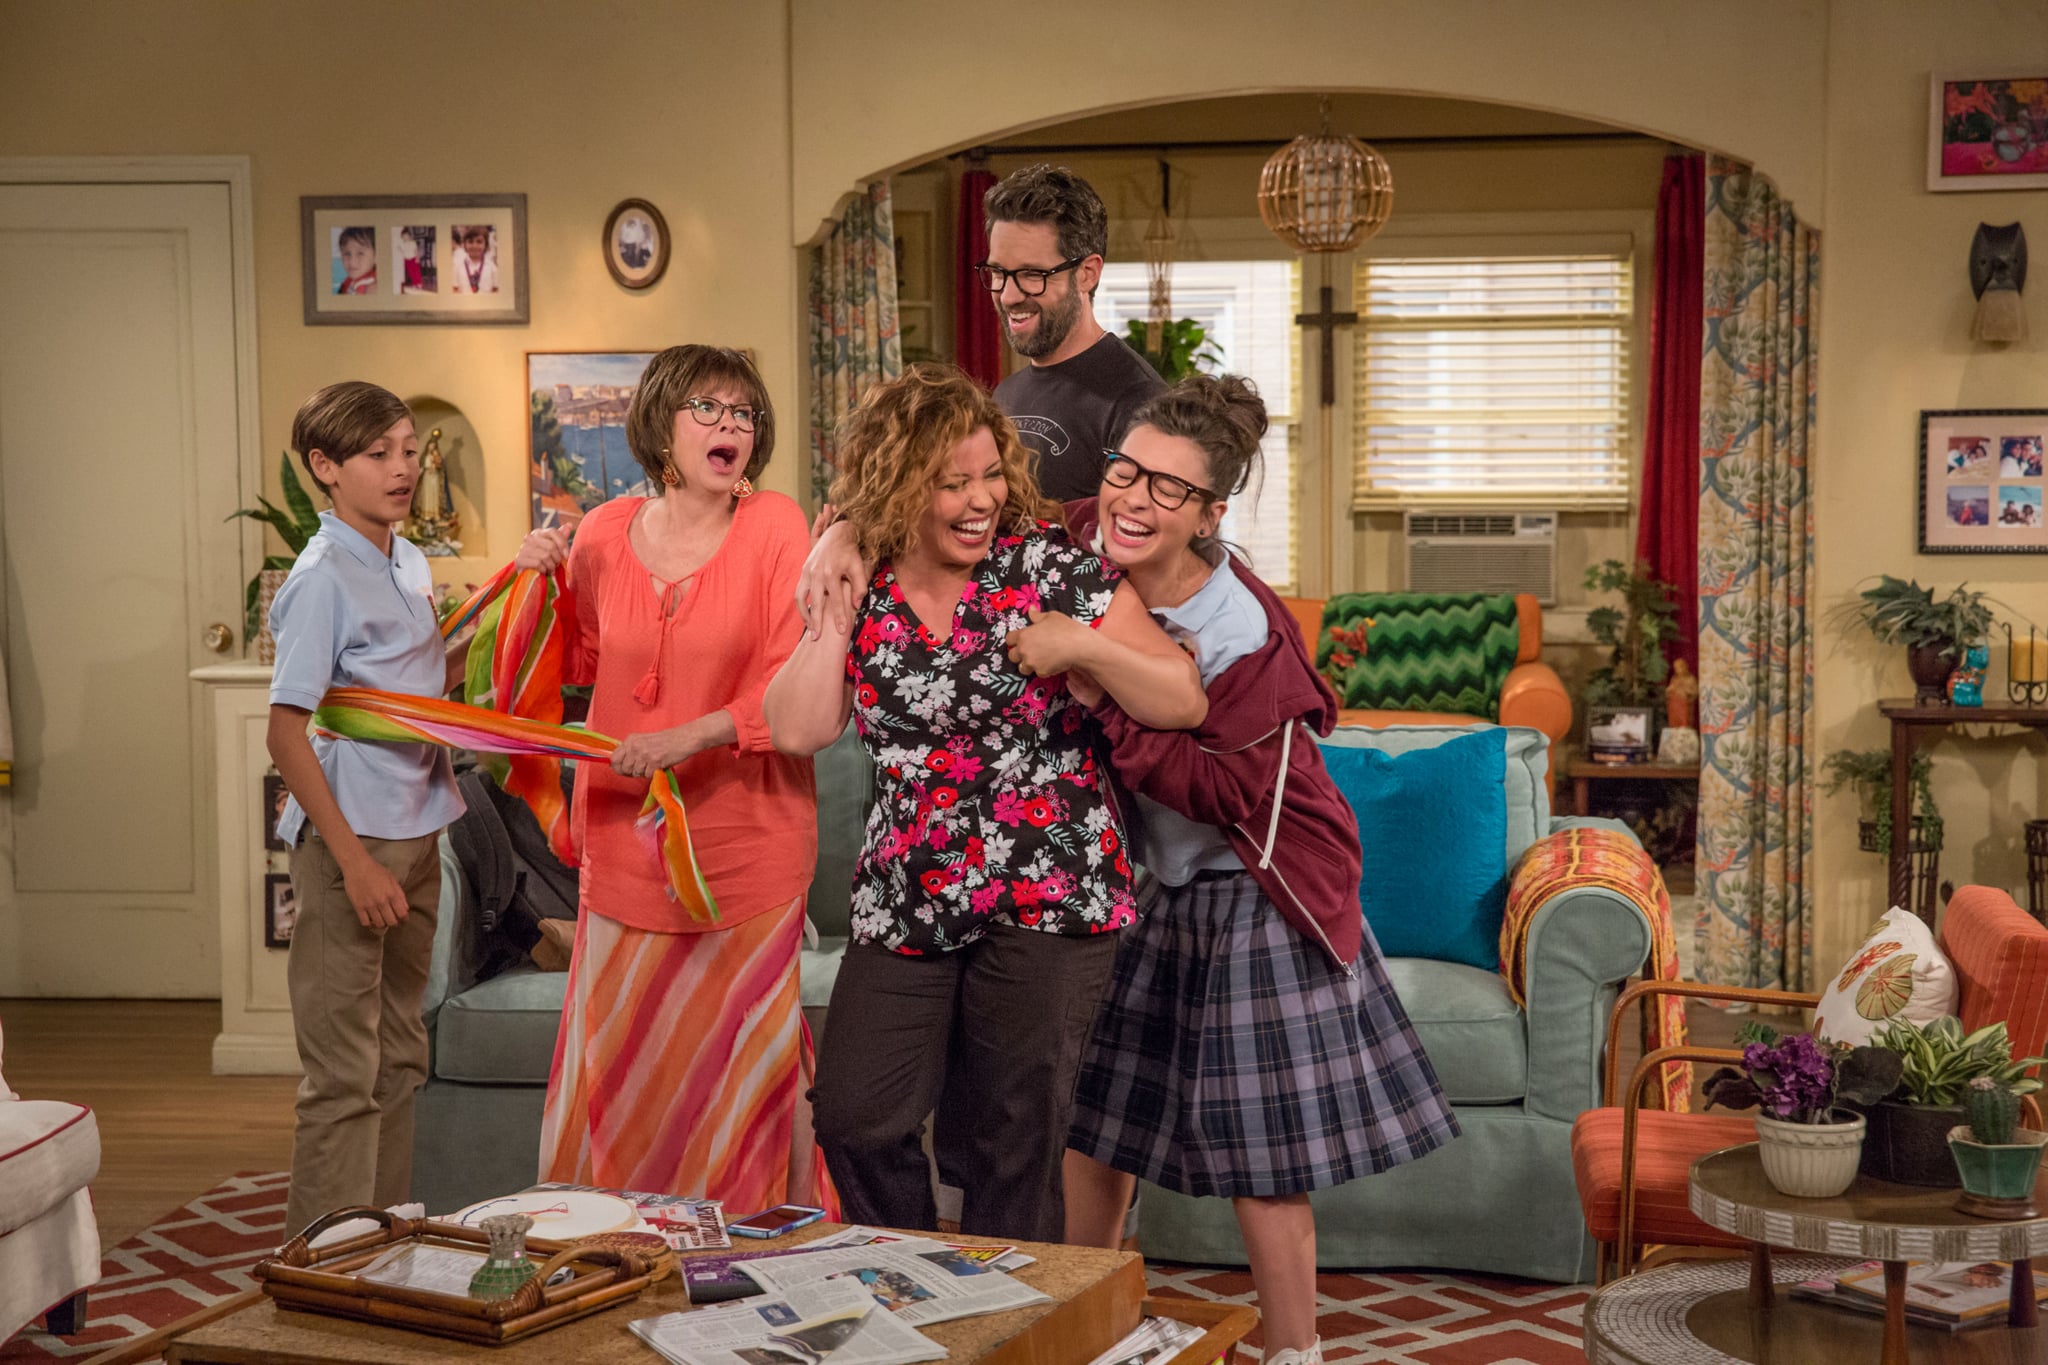 ONE DAY AT A TIME, (from left): Marcel Ruiz, Rita Moreno, Justina Machado, Todd Grinnell, Isabella Gomez, 'Making Up Is Hard To Do', (Season 1, ep. 102, aired Jan. 6, 2017). photo: Michael Yarish / Netflix / Courtesy: Everett Collection